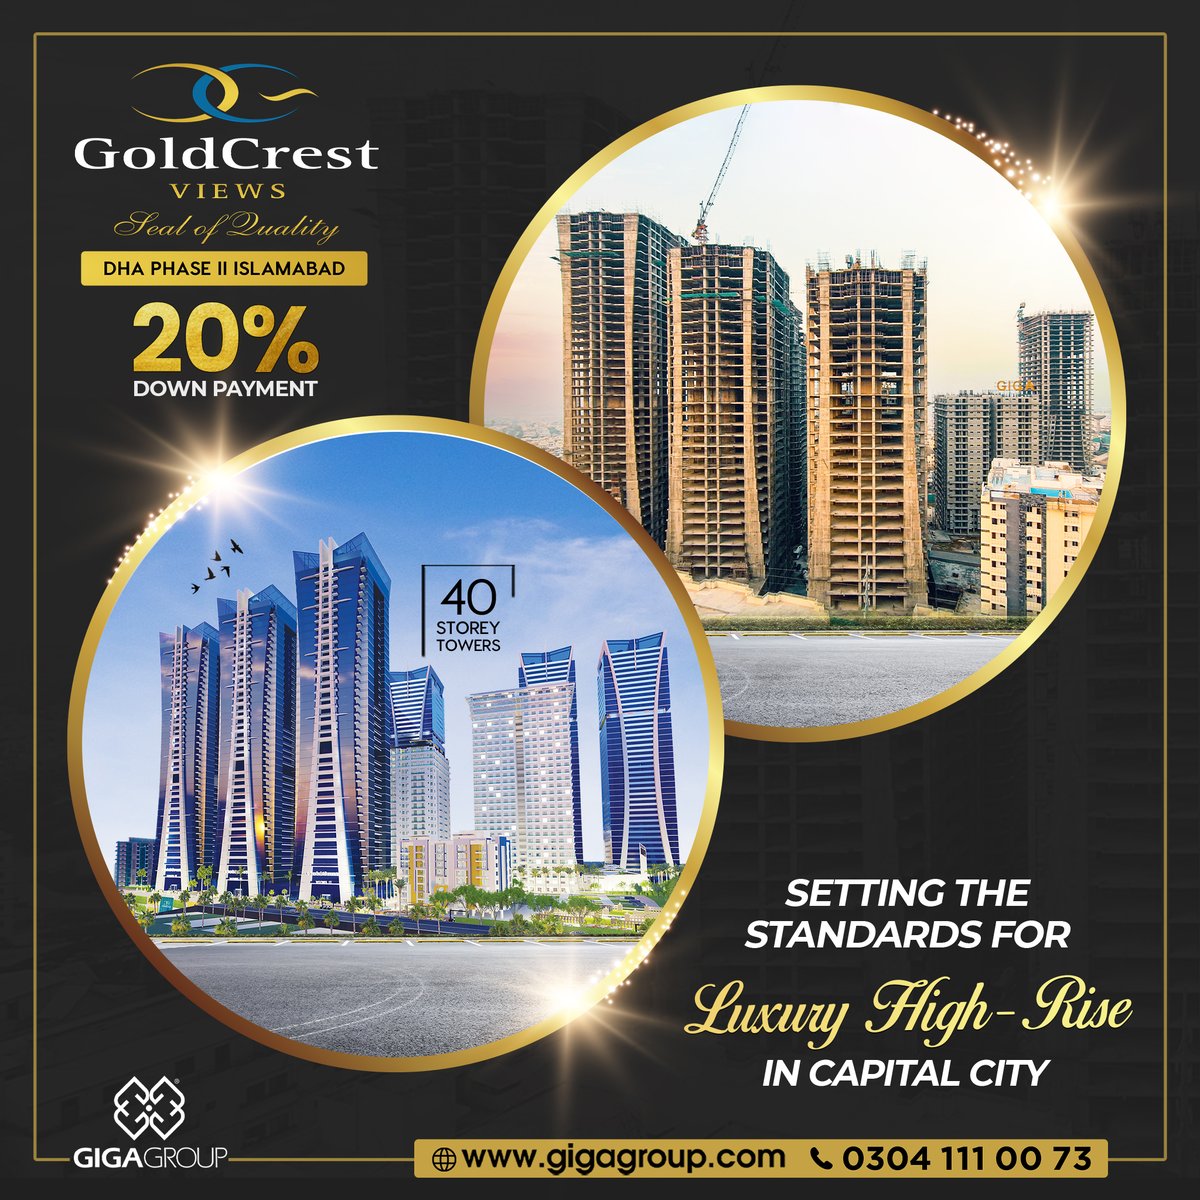 Setting the standards for luxury High-Rise in capital city! Enjoy the luxury lifestyle at 𝗚𝗼𝗹𝗱𝗰𝗿𝗲𝘀𝘁 𝗩𝗶𝗲𝘄𝘀 Islamabad by booking your 𝘀𝘁𝘂𝗱𝗶𝗼, 𝟭, 𝟮, 𝟯 𝗮𝗻𝗱 𝟰 𝗯𝗲𝗱𝗿𝗼𝗼𝗺 𝗹𝘂𝘅𝘂𝗿𝘆 𝗮𝗽𝗮𝗿𝘁𝗺𝗲𝗻𝘁𝘀 𝗮𝗻𝗱 𝗽𝗲𝗻𝘁𝗵𝗼𝘂𝘀𝗲𝘀 on 𝟐𝟎% 𝗗𝗼𝘄𝗻…